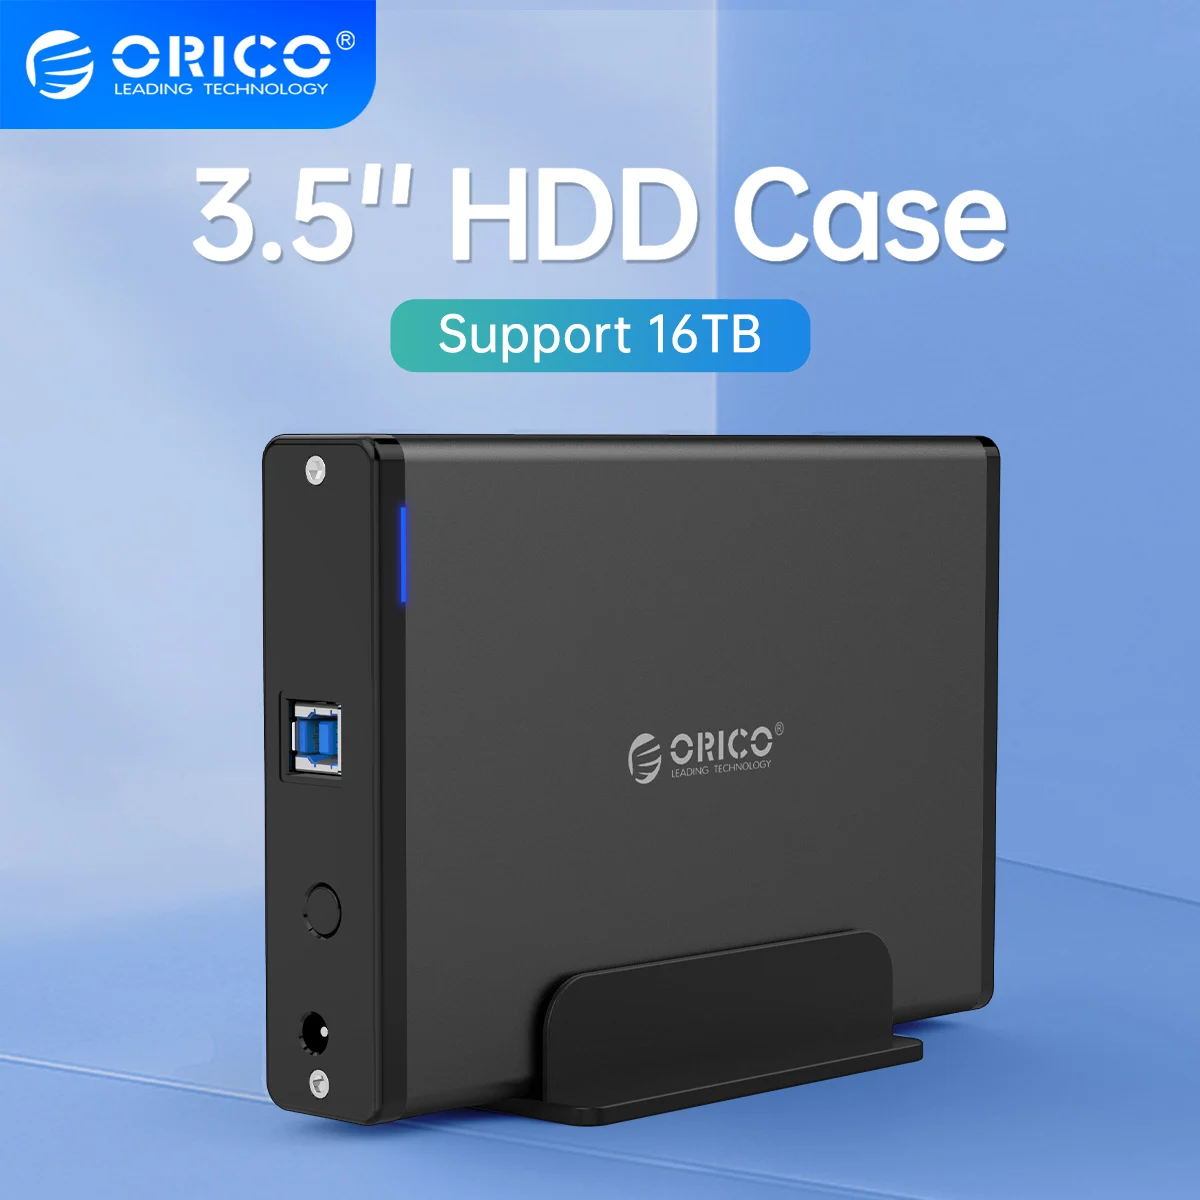 Wedge Sørge over Sprout ORICO 3.5'' HDD Case SATA to USB 3.0 Adapter External Hard Drive Enclosure  for 2.5" 3.5" SSD Disk HDD Case for PC